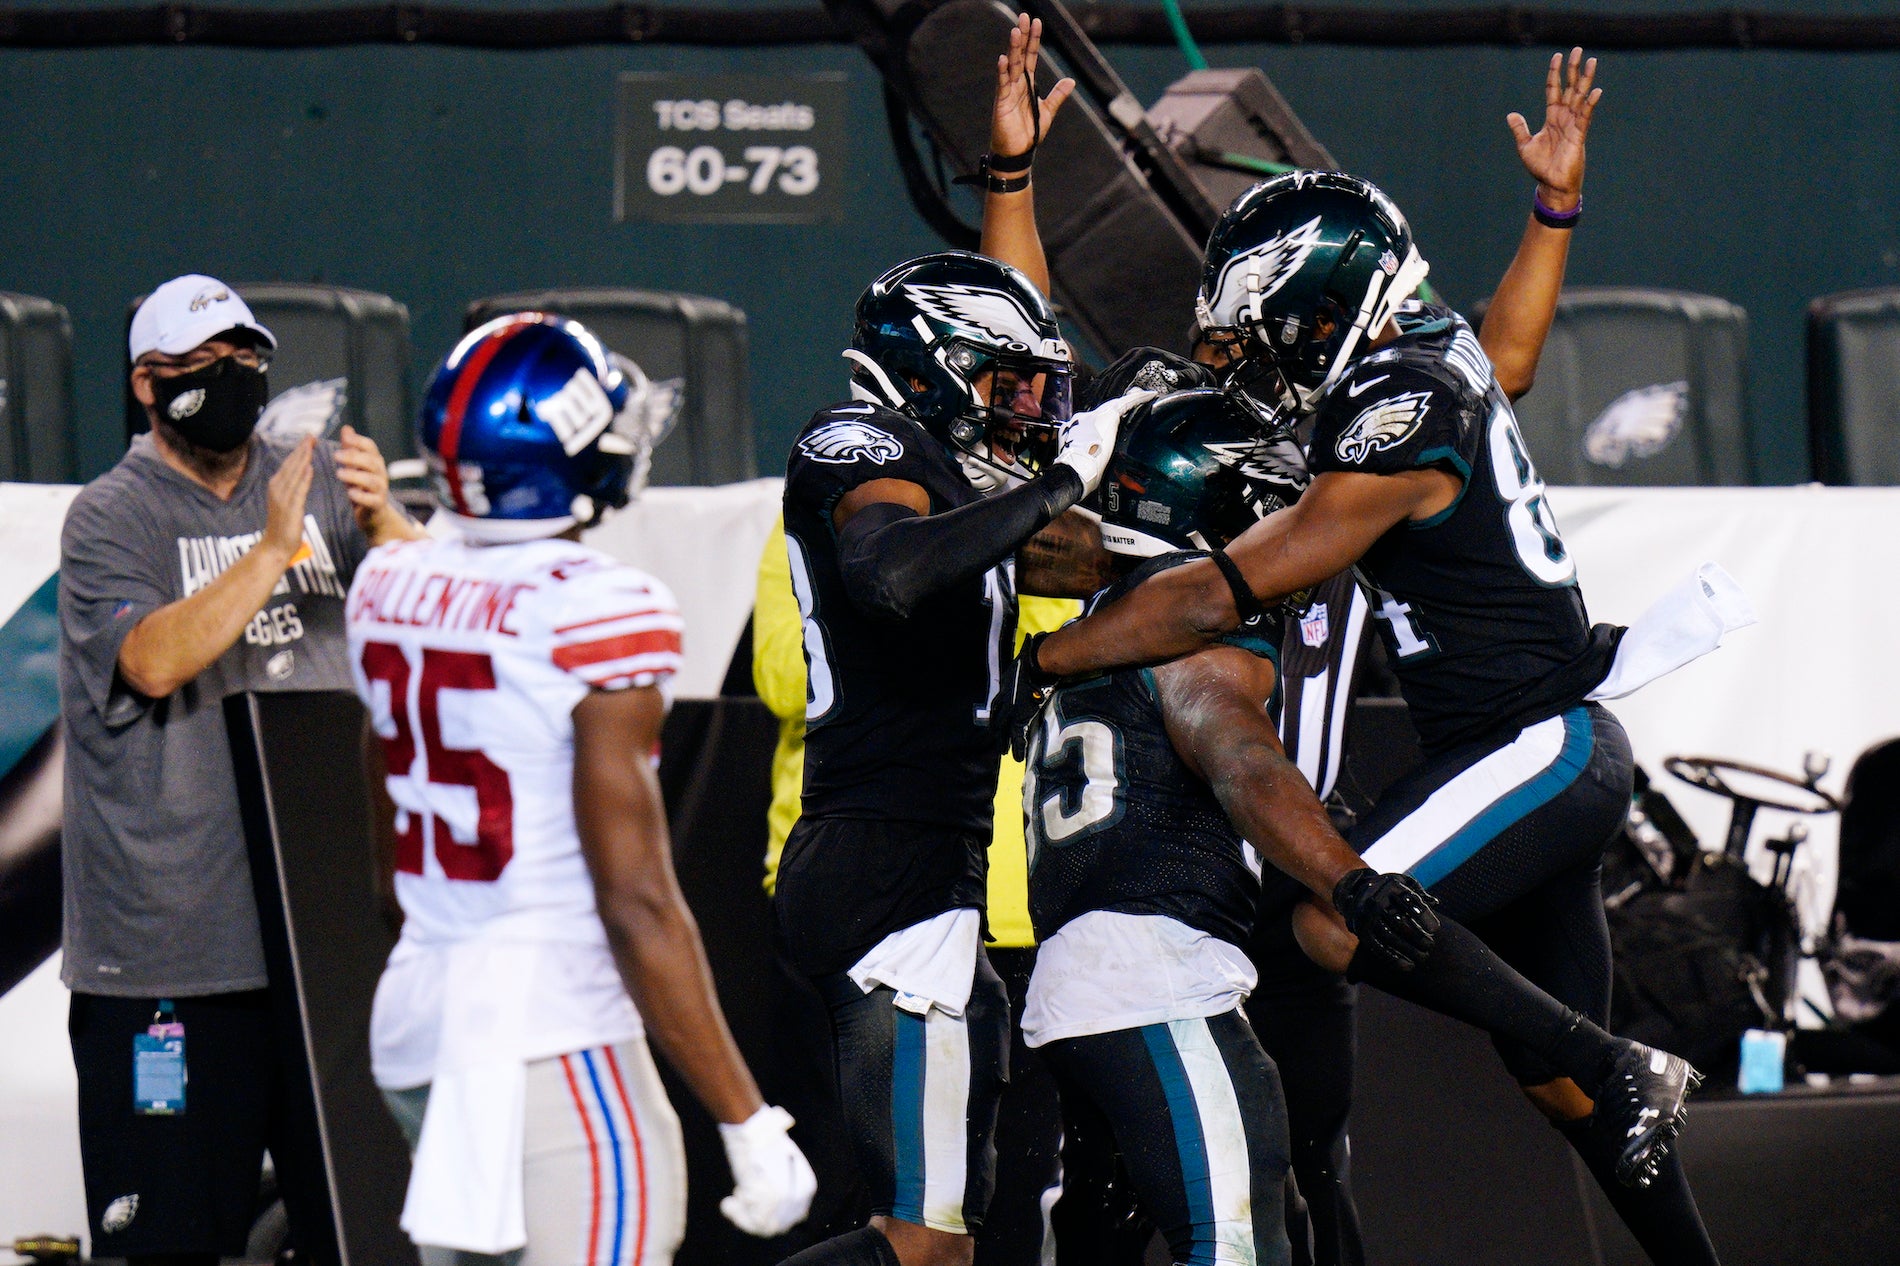 Philadelphia Eagles players celebrate after a touchdown by Boston Scott during the second half of an NFL football game against the New York Giants, Thursday, Oct. 22, 2020, in Philadelphia